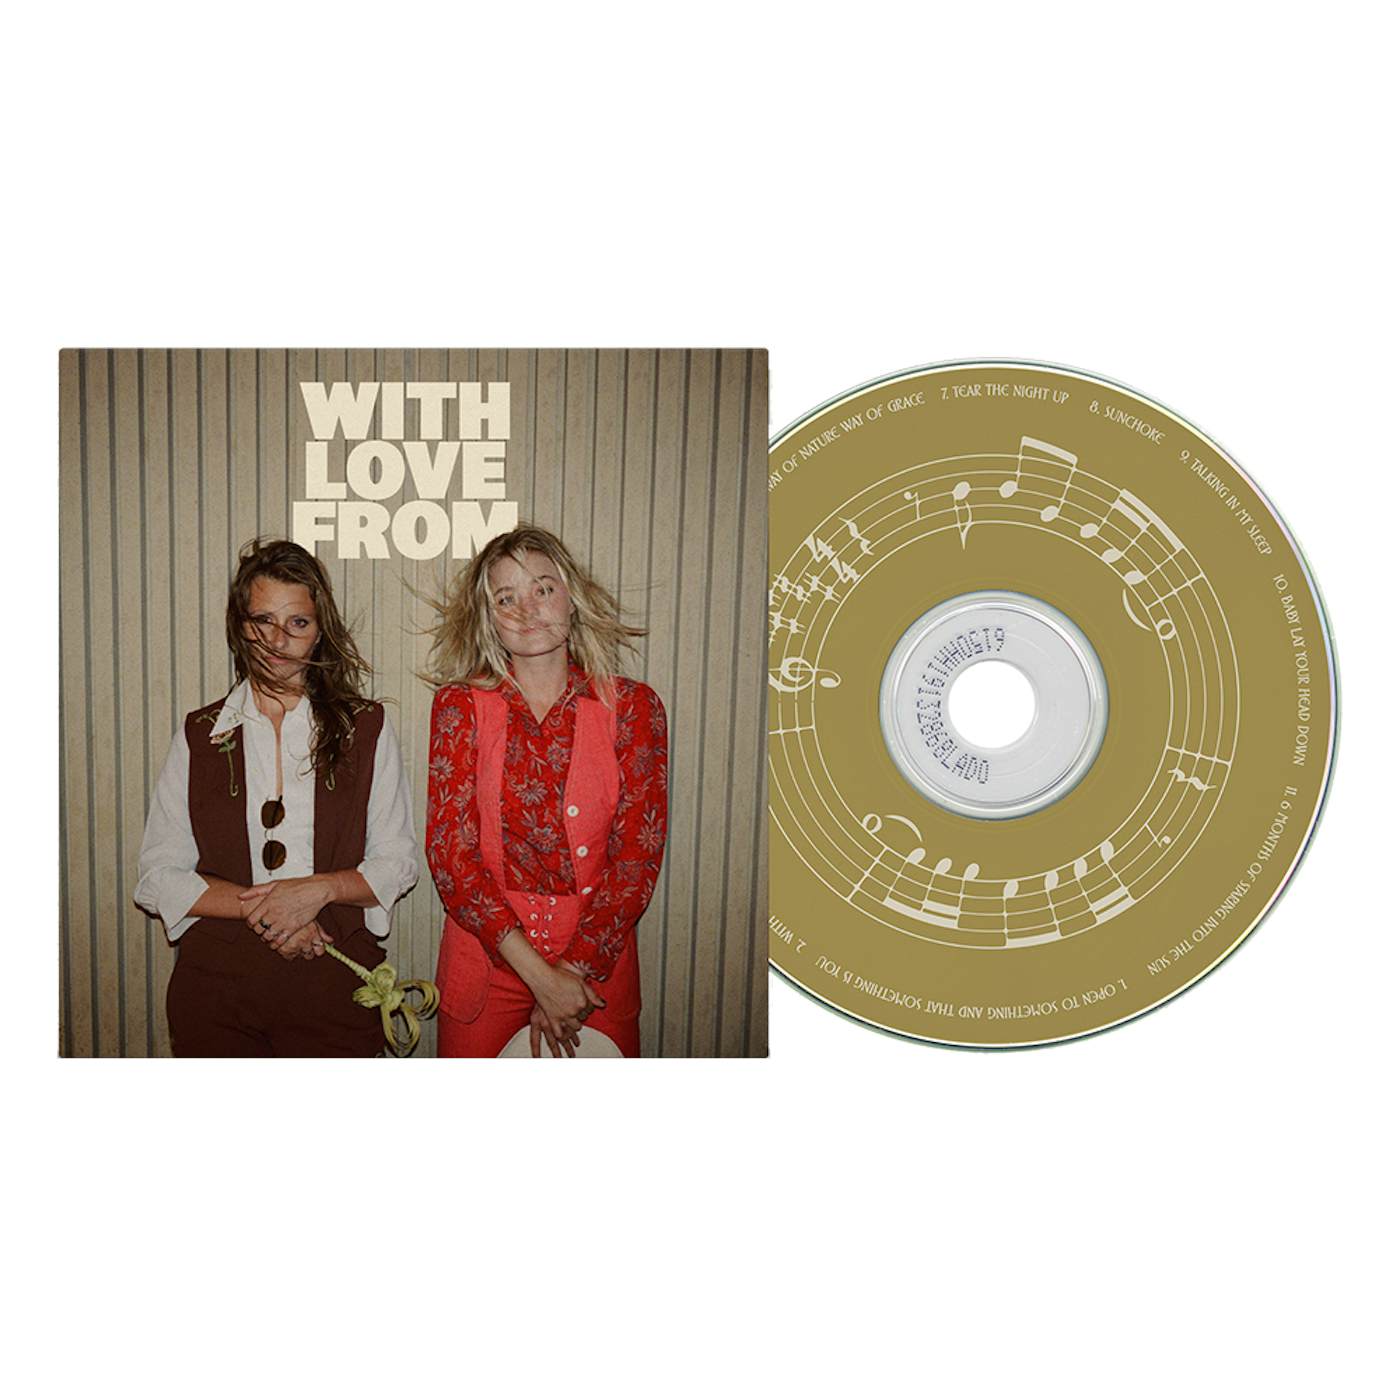 Aly & AJ With Love From CD